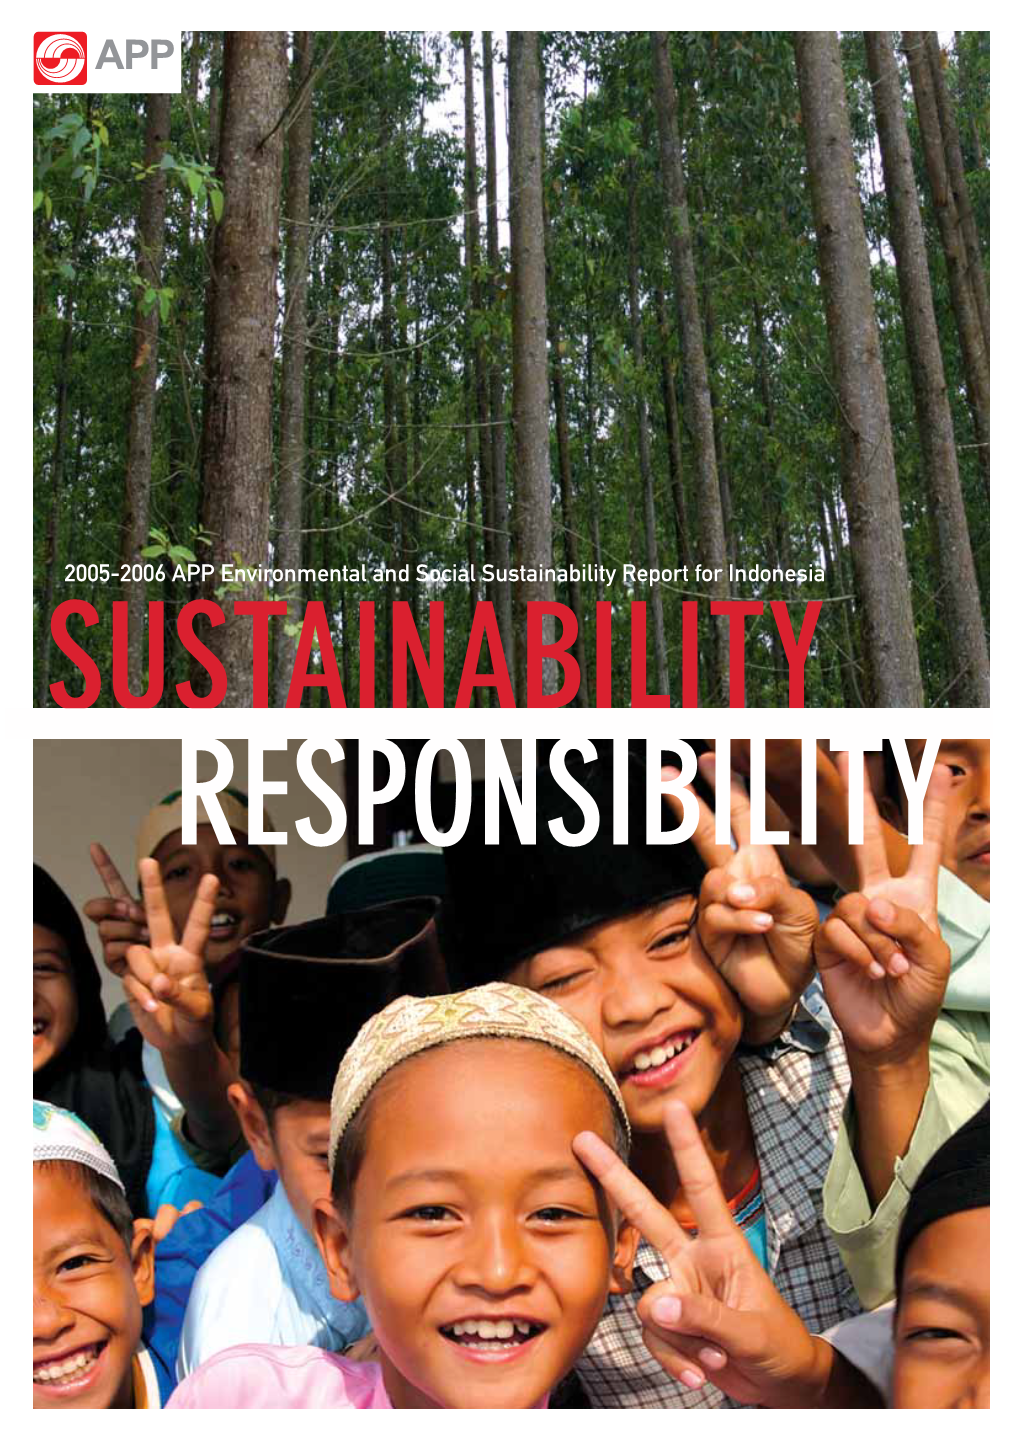 APP Environmental and Social Sustainability Report for Indonesia